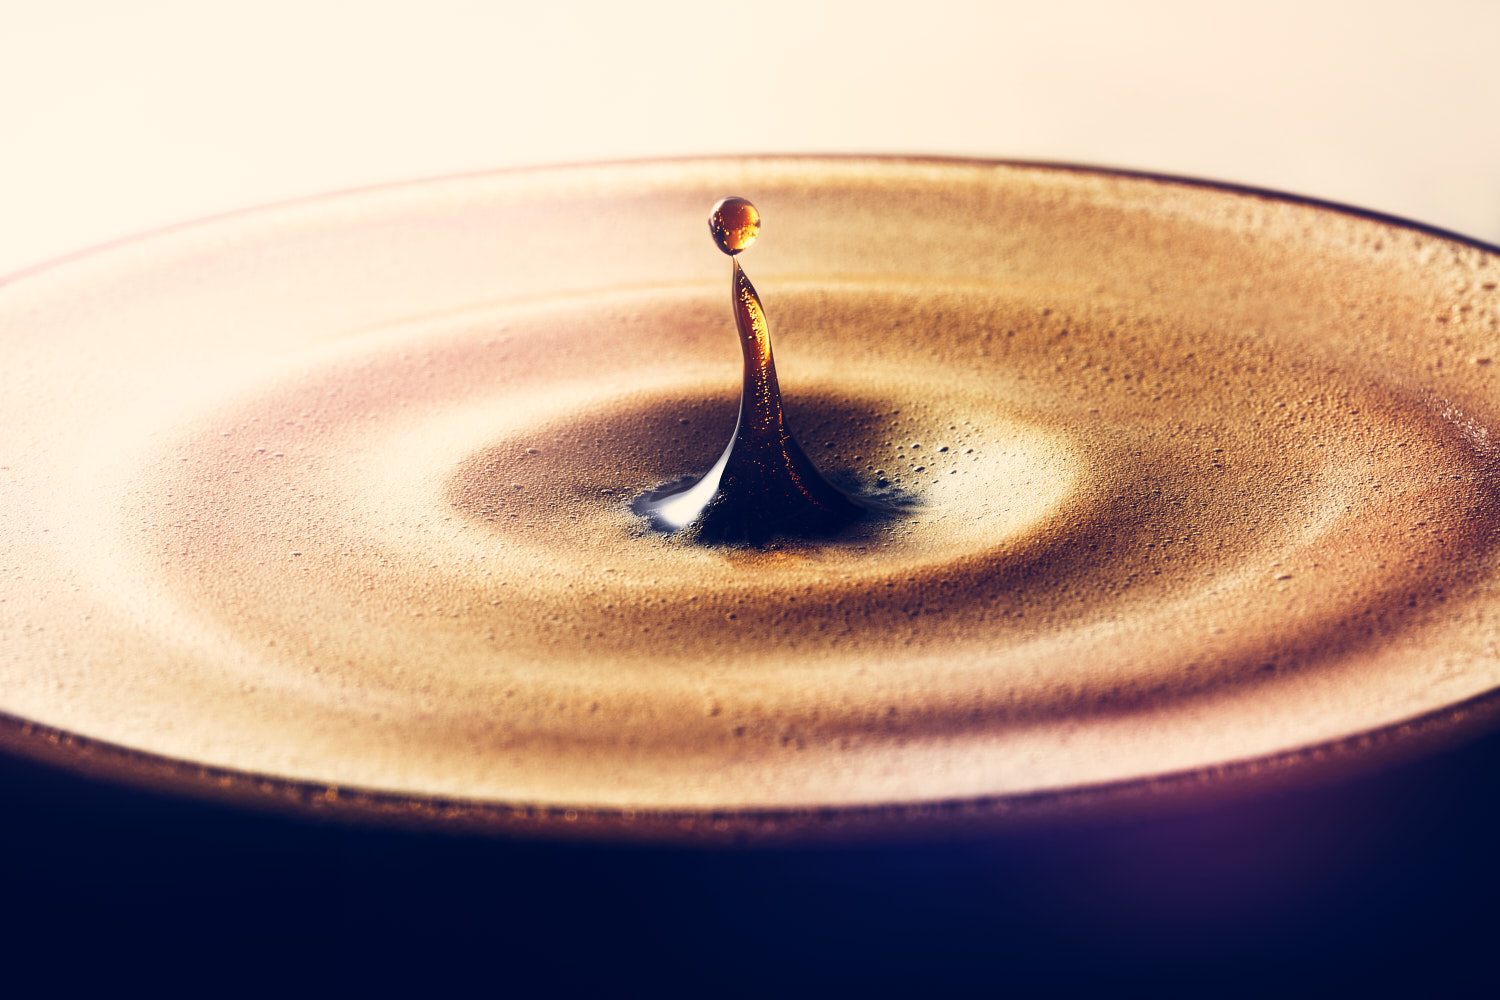 Expresso glass filled with fresh coffee with a drop falling and splashing into it creating ripples - London Food & Drinks Photographer